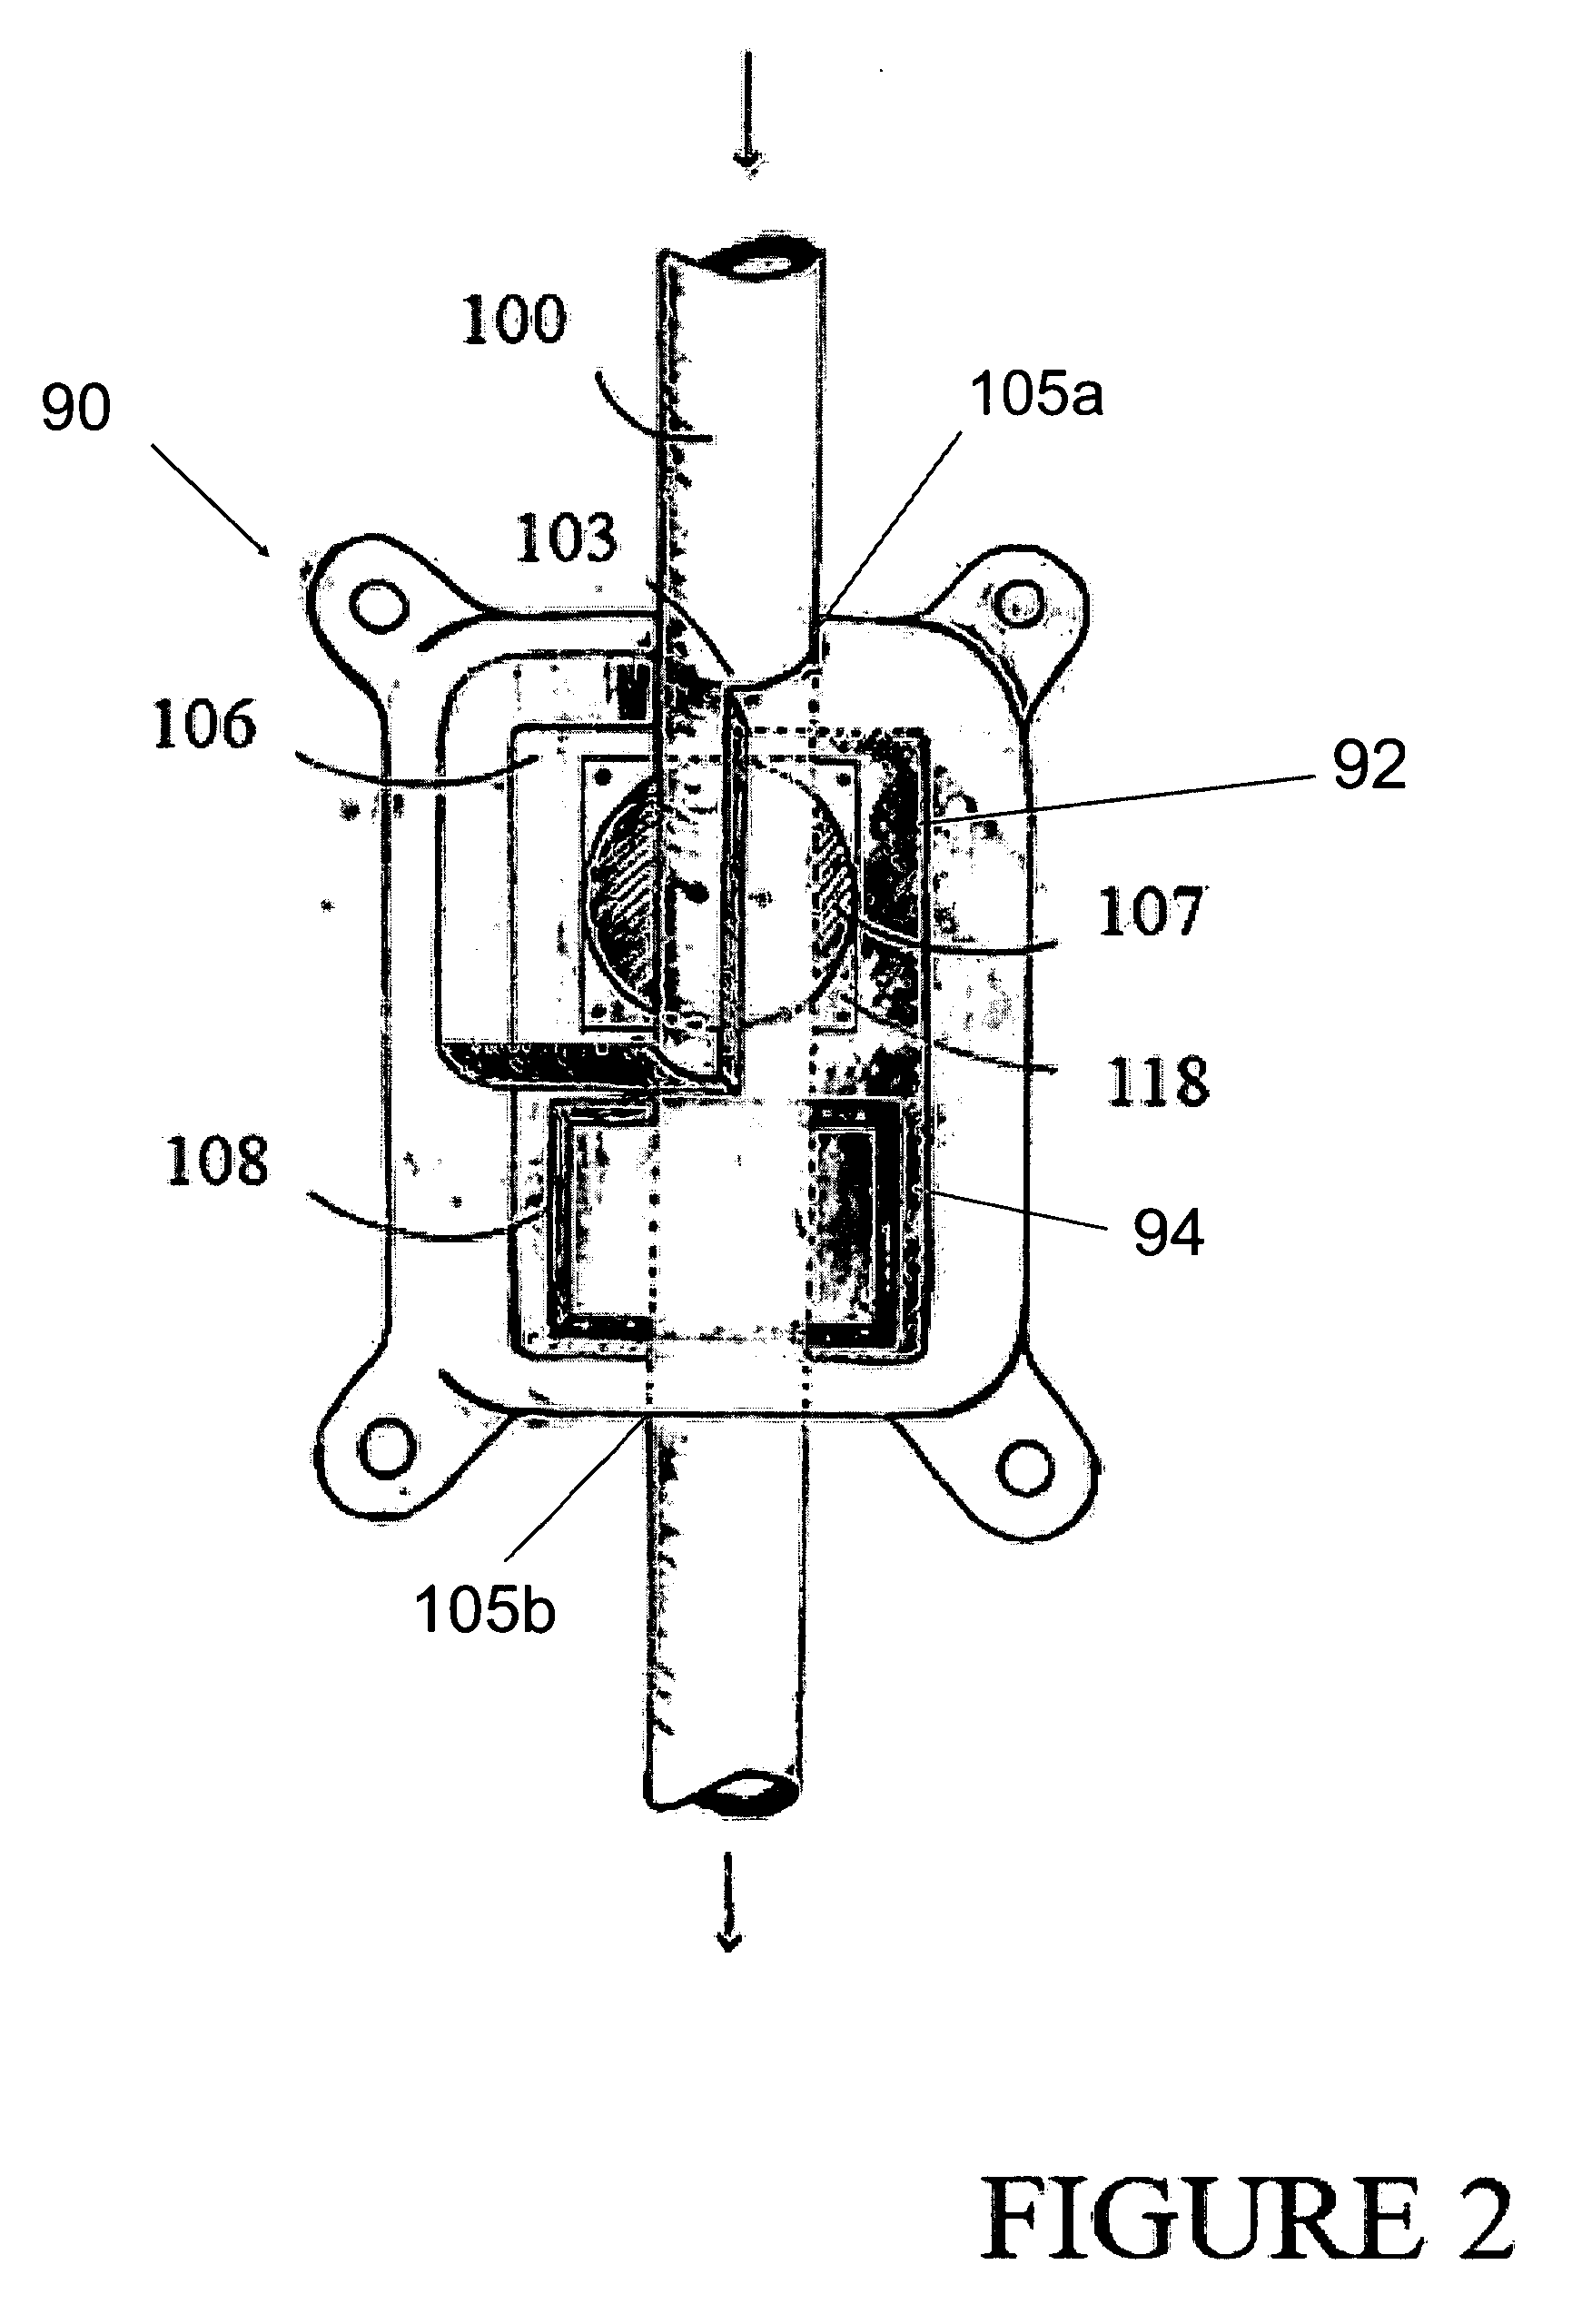 Implantable anti-clogging device for maintenance of cerebrospinal fluid shunt patency